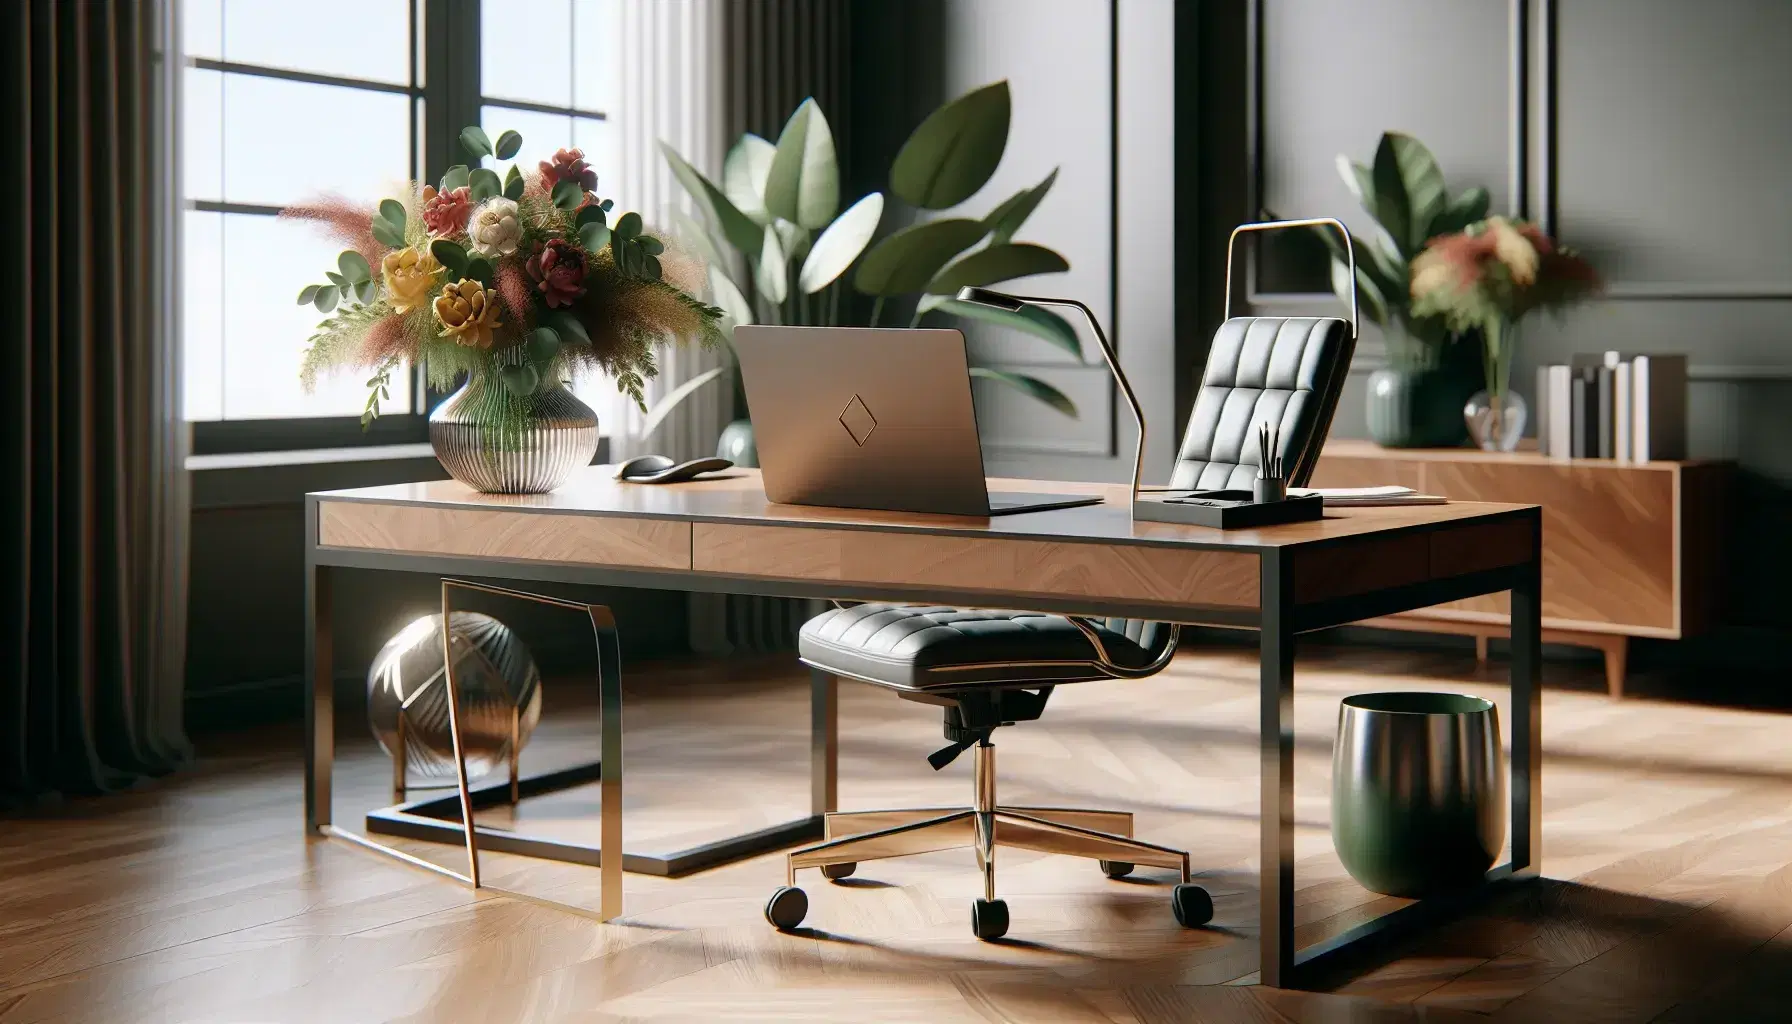 Elegant office with wooden desk, silver laptop, green plant, black leather chair, vase of colorful flowers and skyscrapers view.